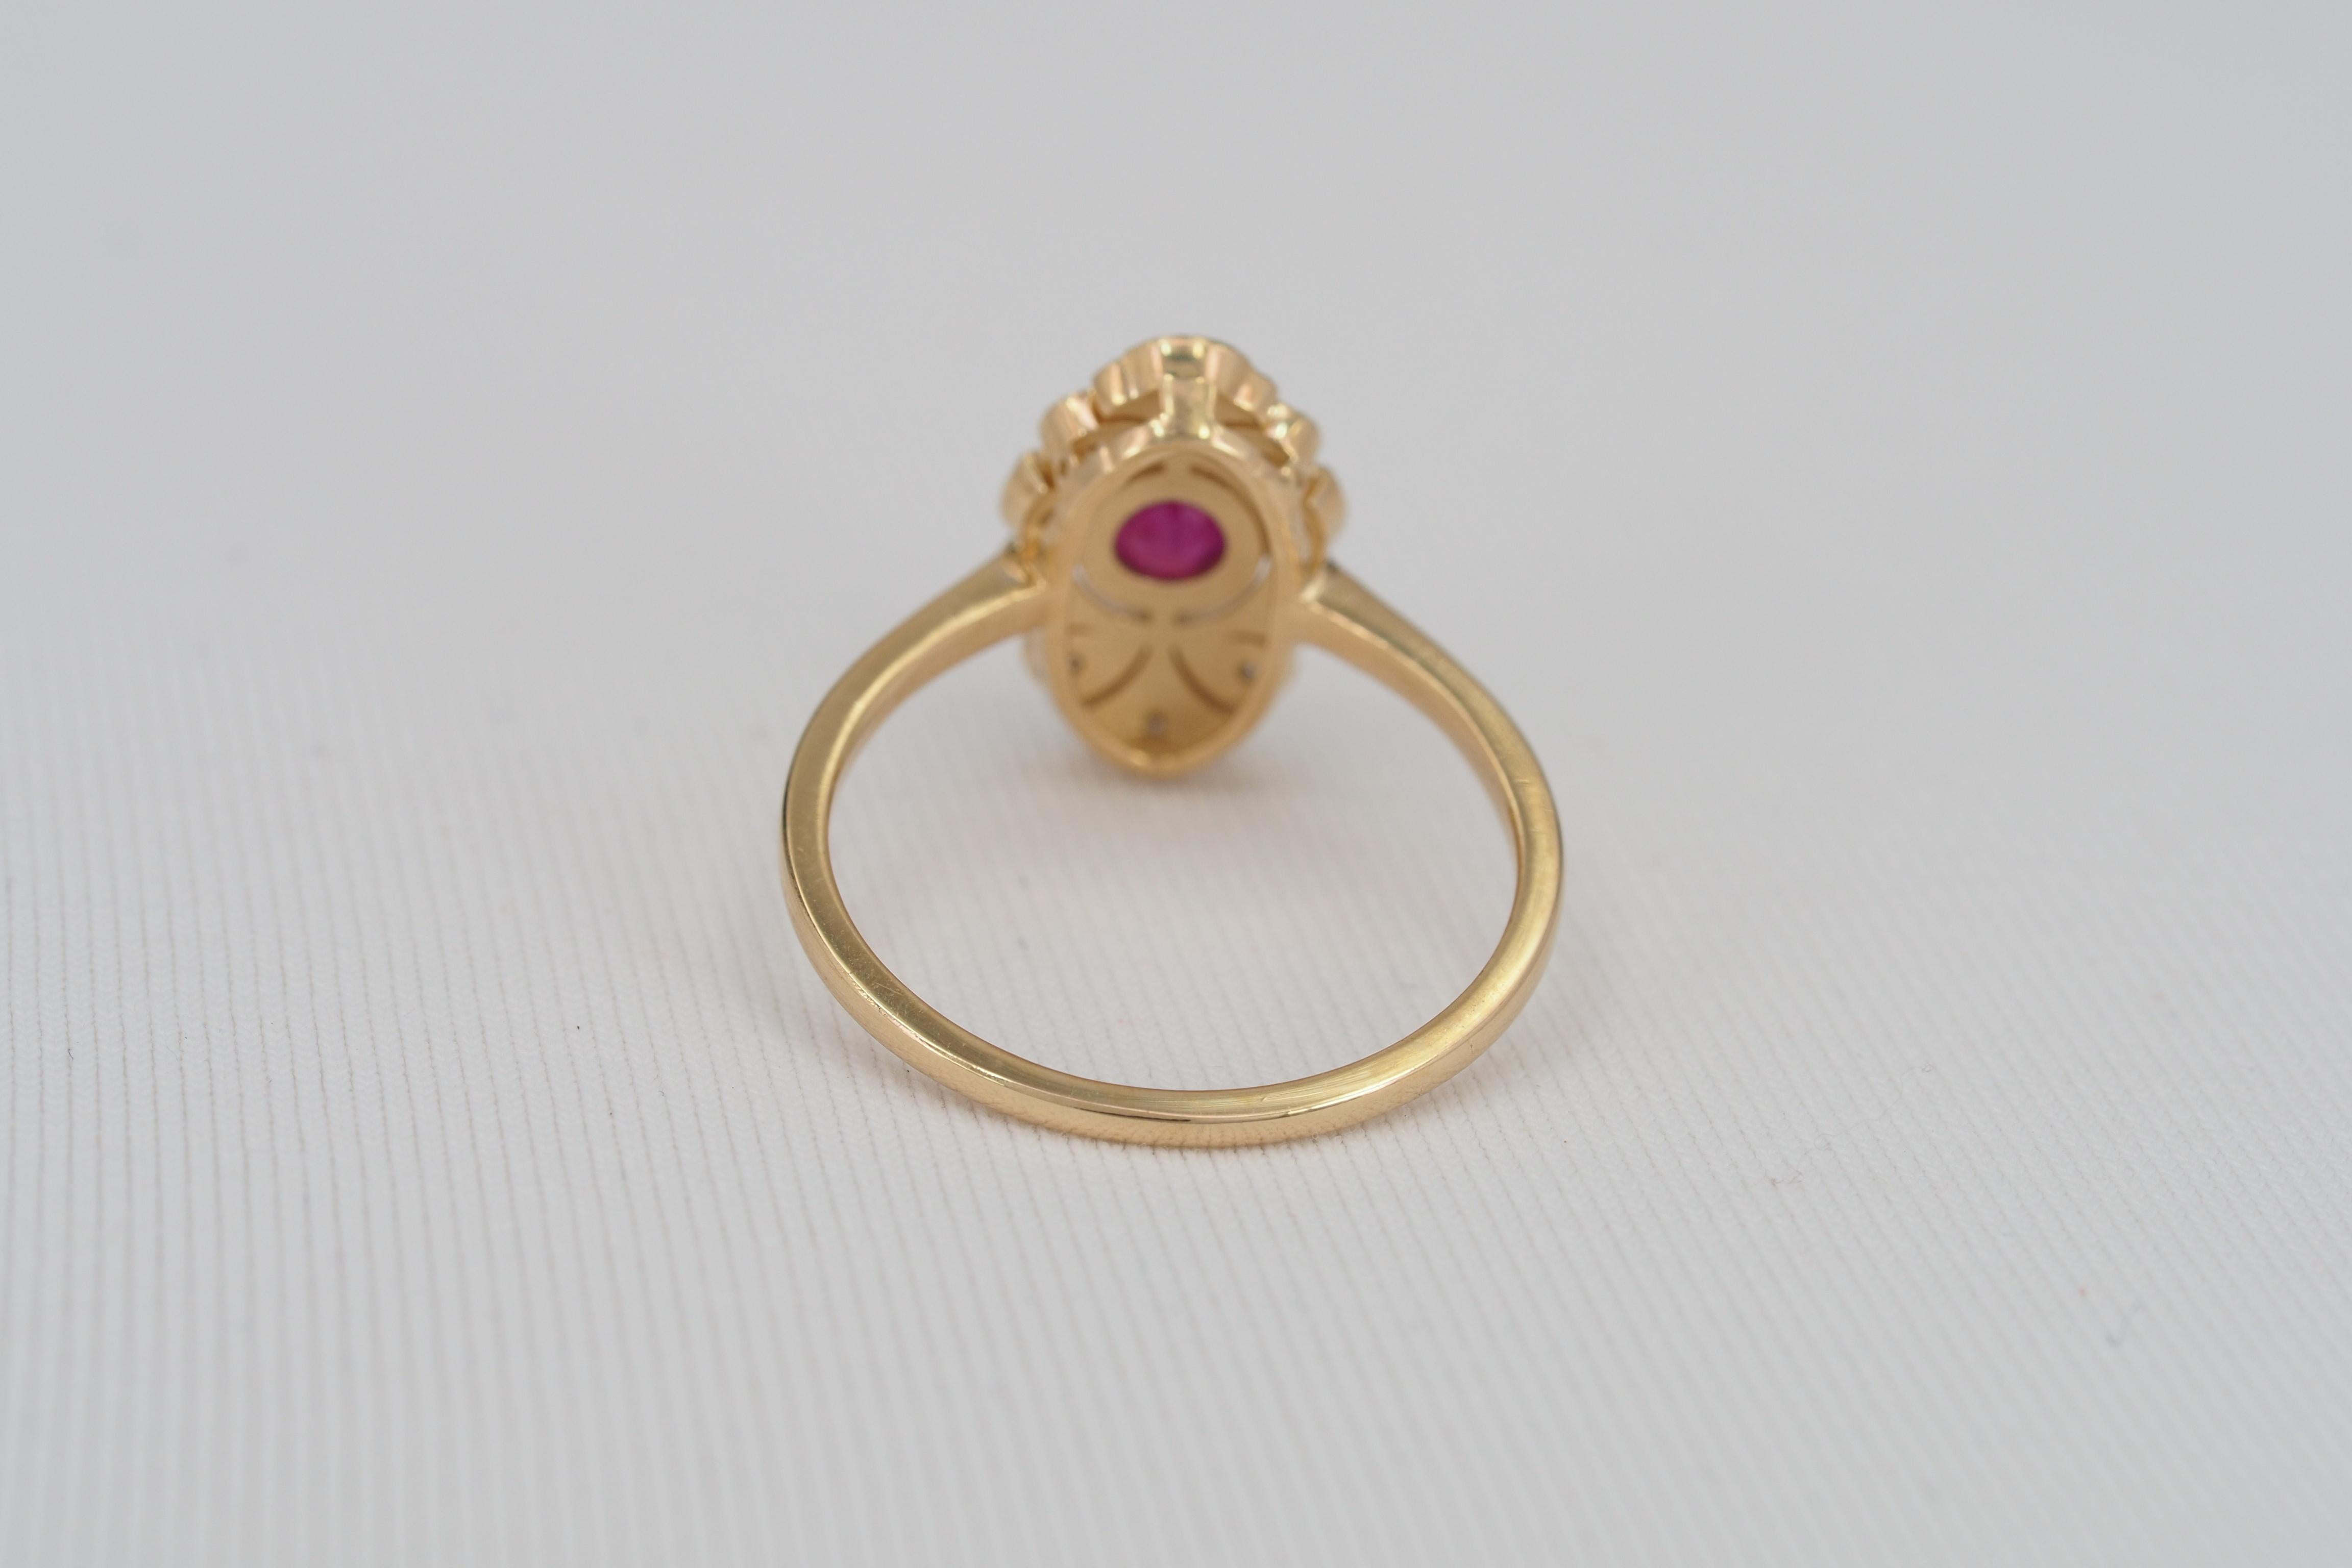 Women's 14 Karat Gold Ring with Ruby and Diamonds, Vintage Inspired Ring